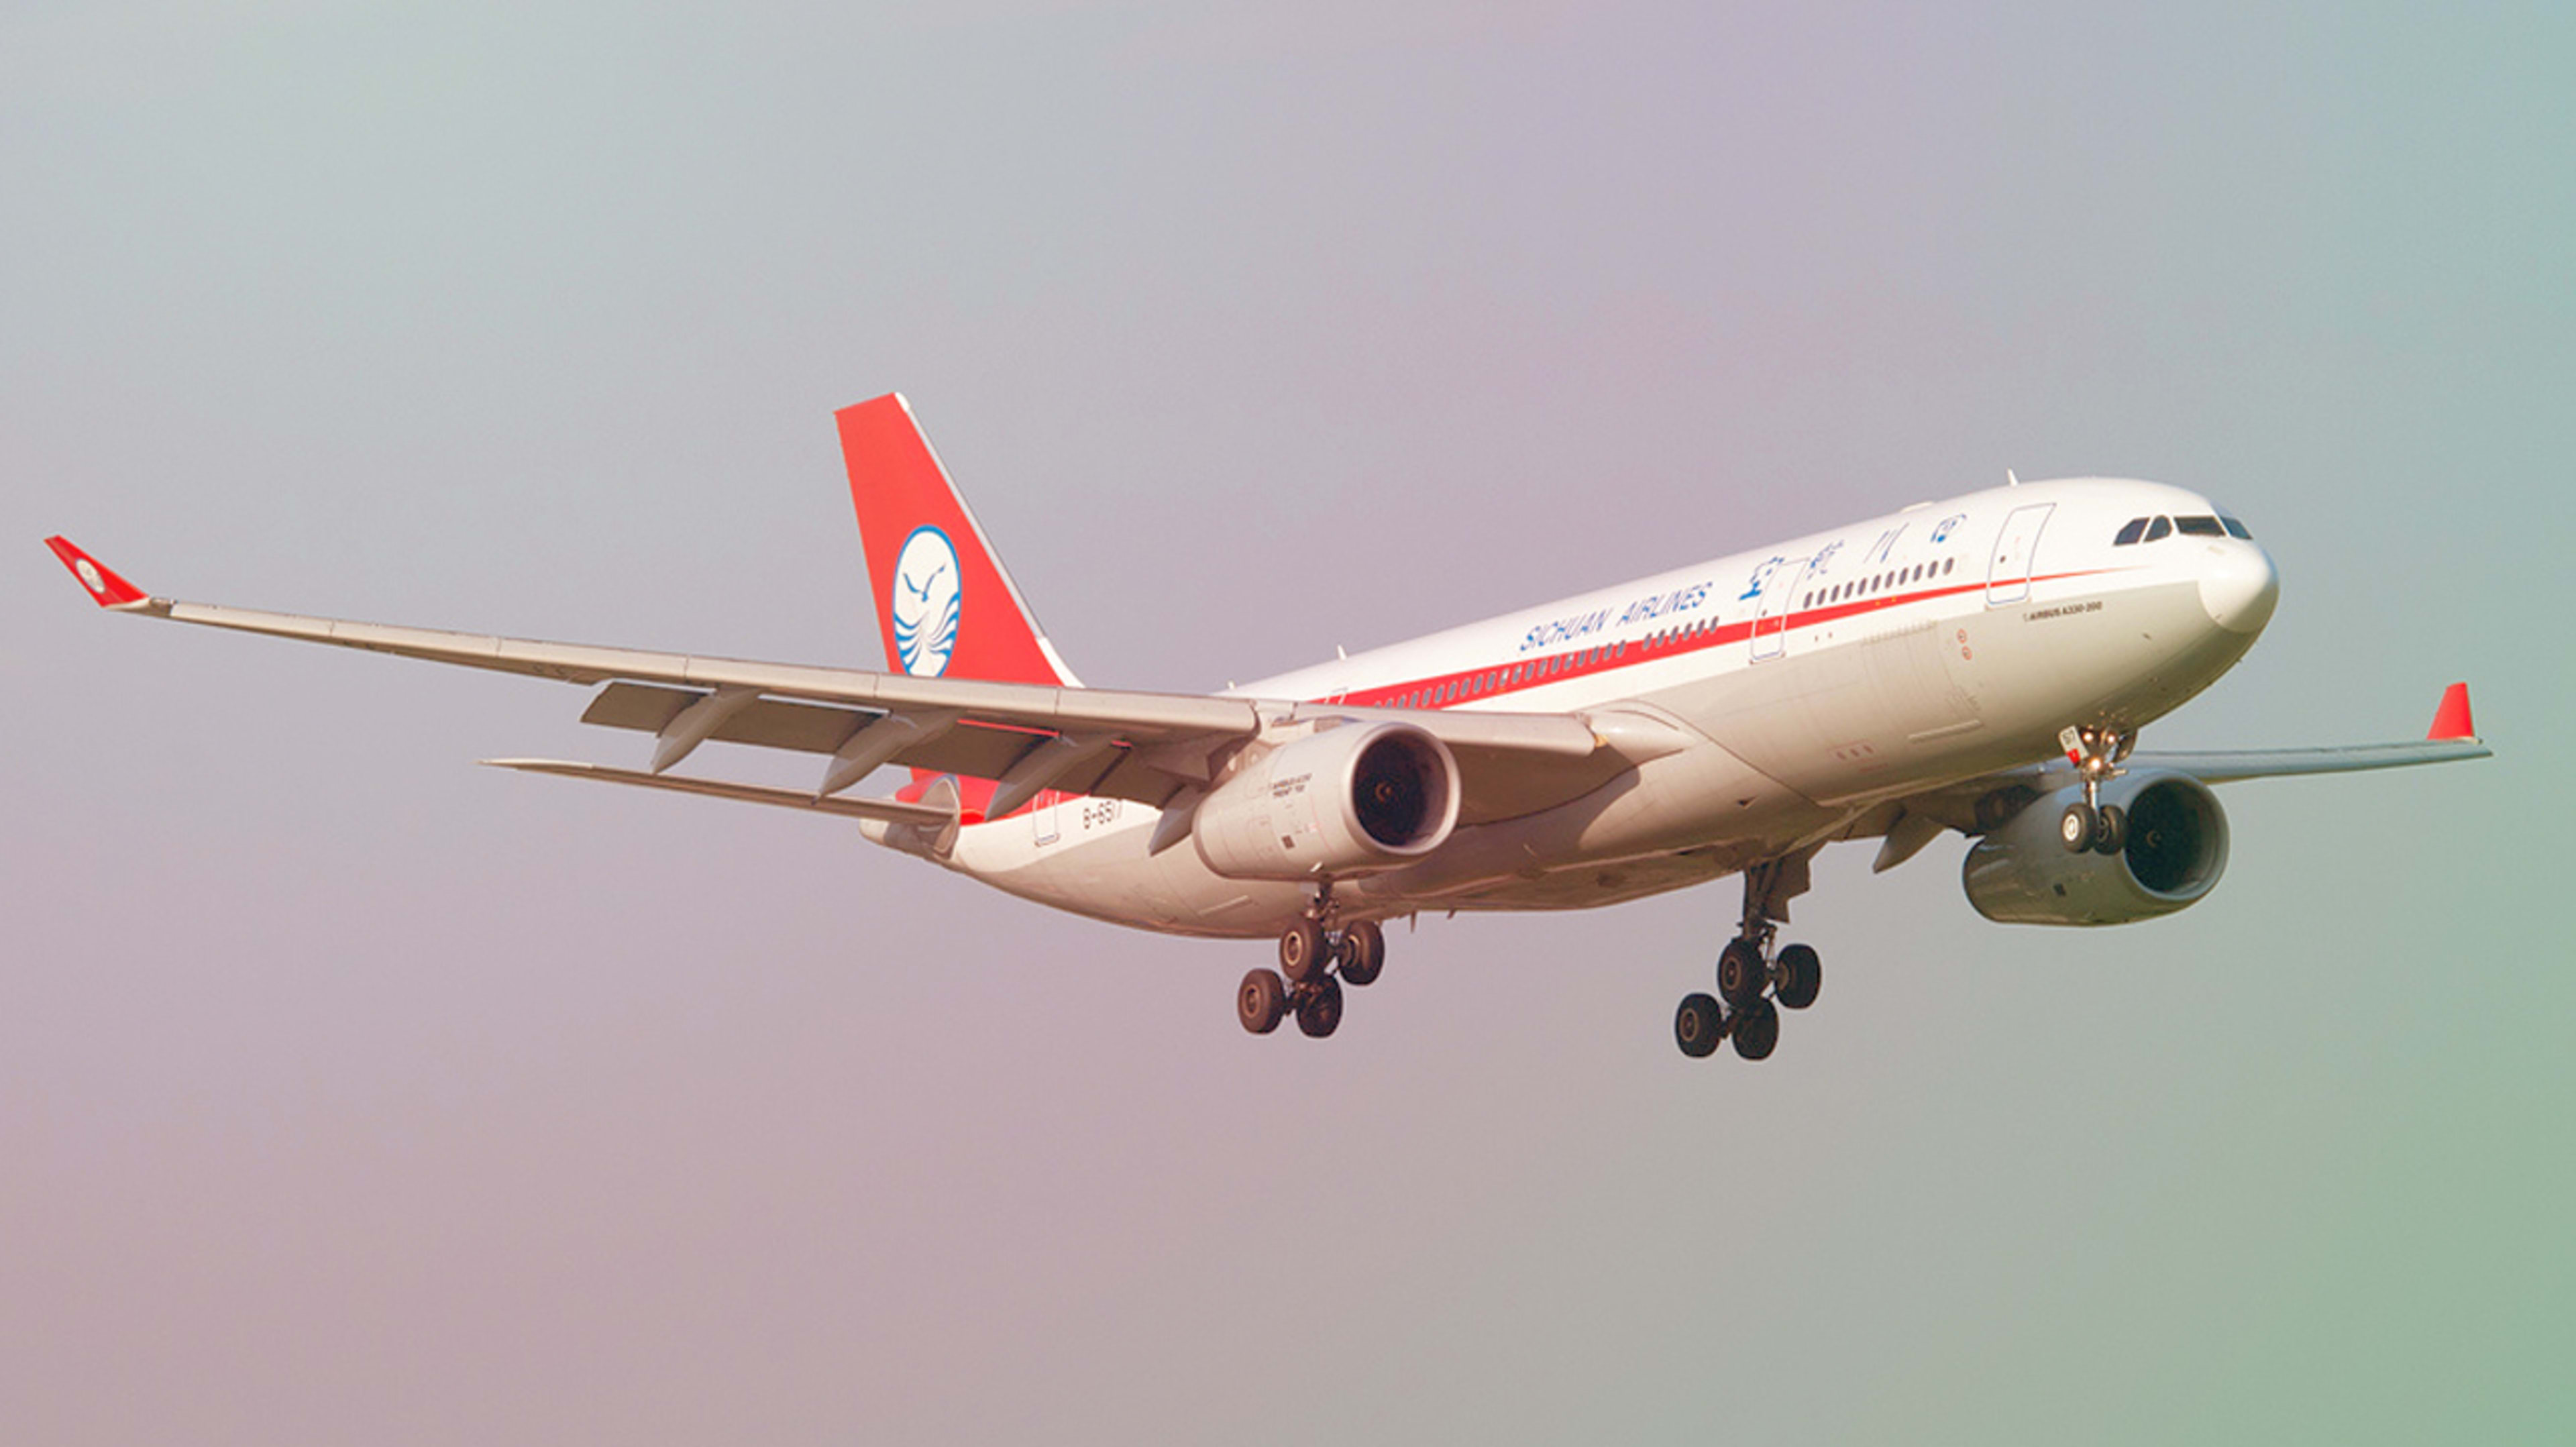 A Sichuan Airlines co-pilot was sucked halfway out of a cockpit window